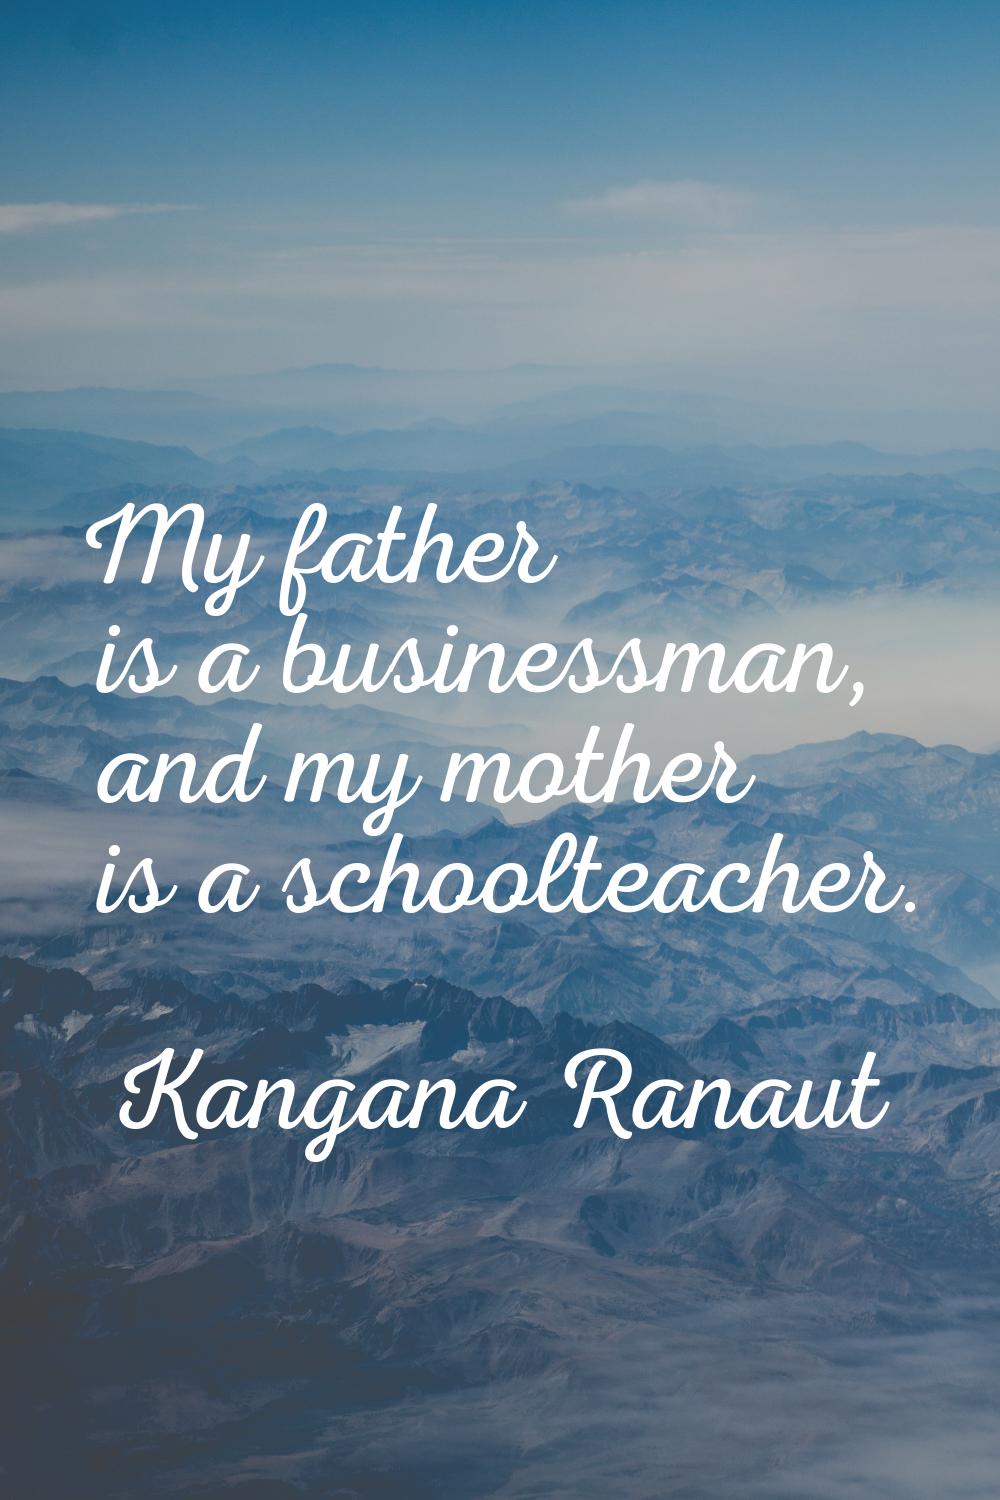 My father is a businessman, and my mother is a schoolteacher.